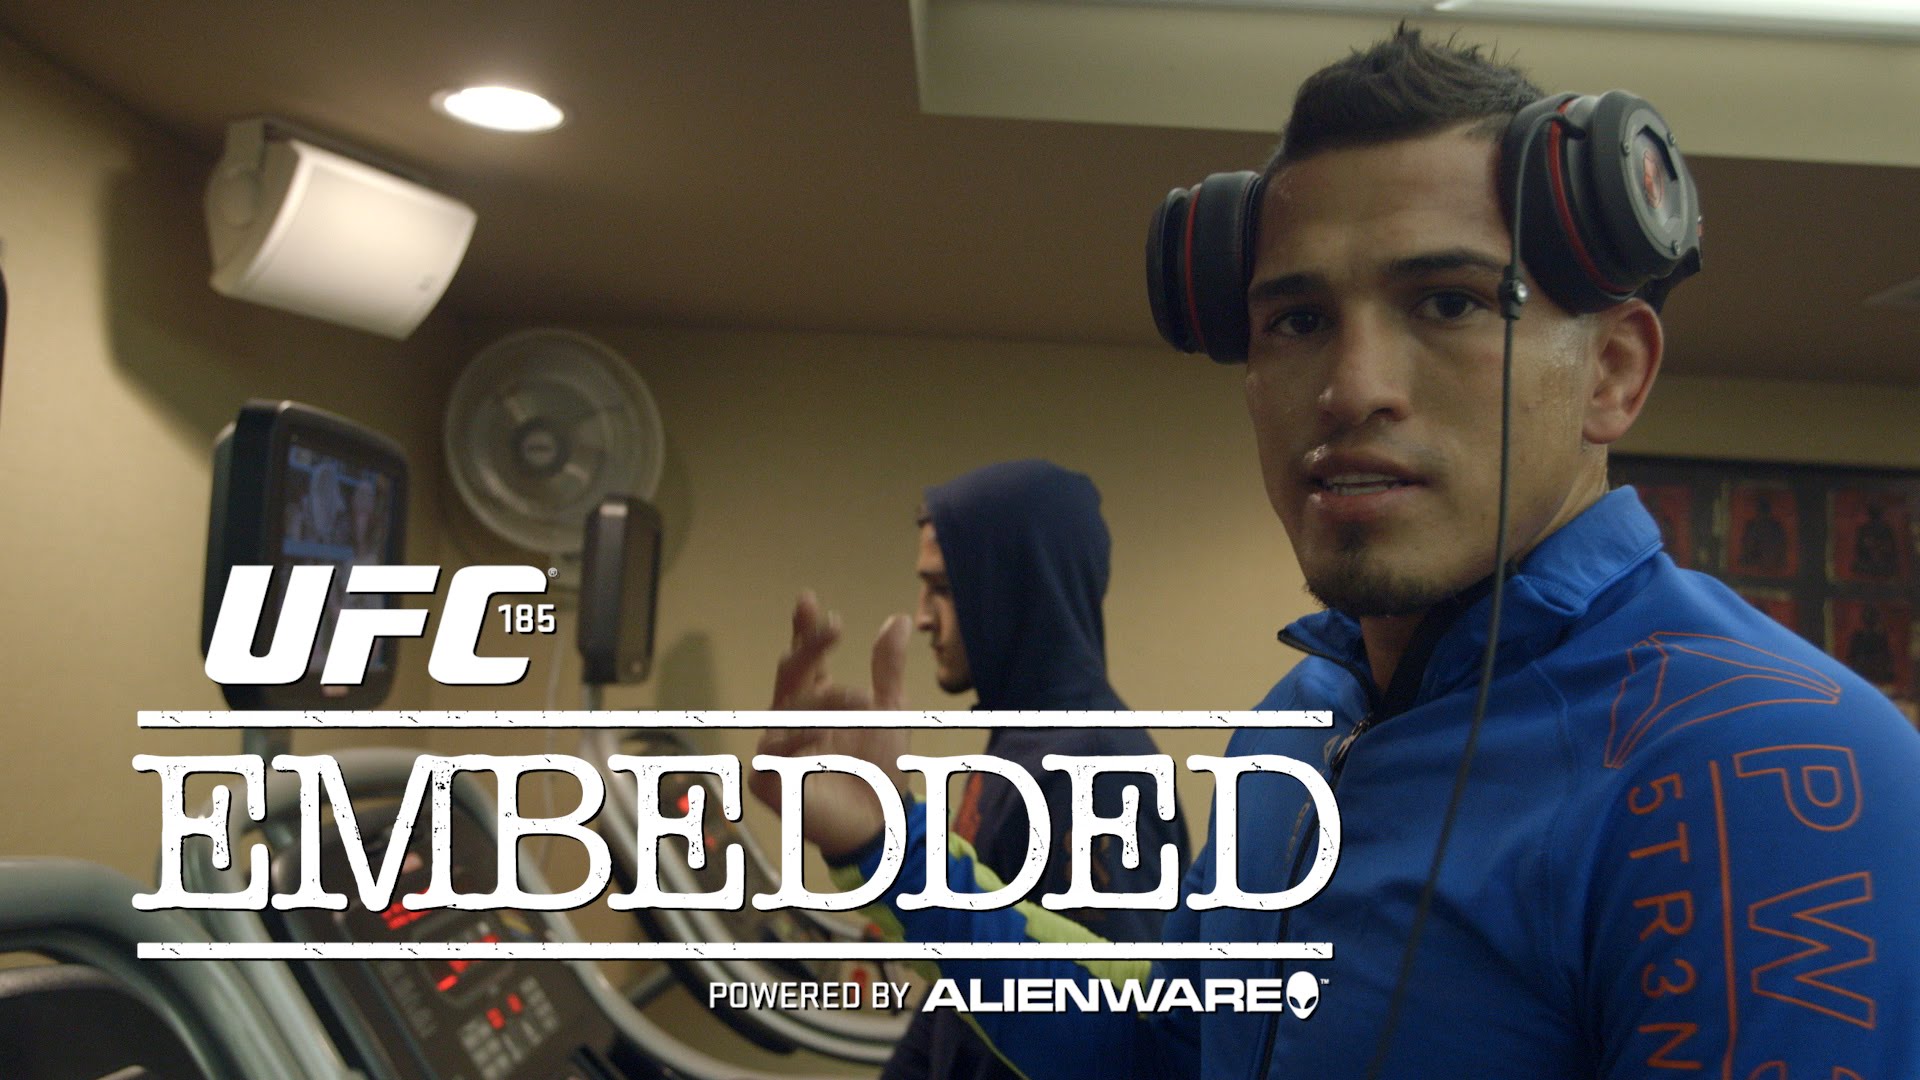 Video - UFC 185 Pettis vs Dos Anjos Embedded: Vlog Series - Episode 11920 x 1080